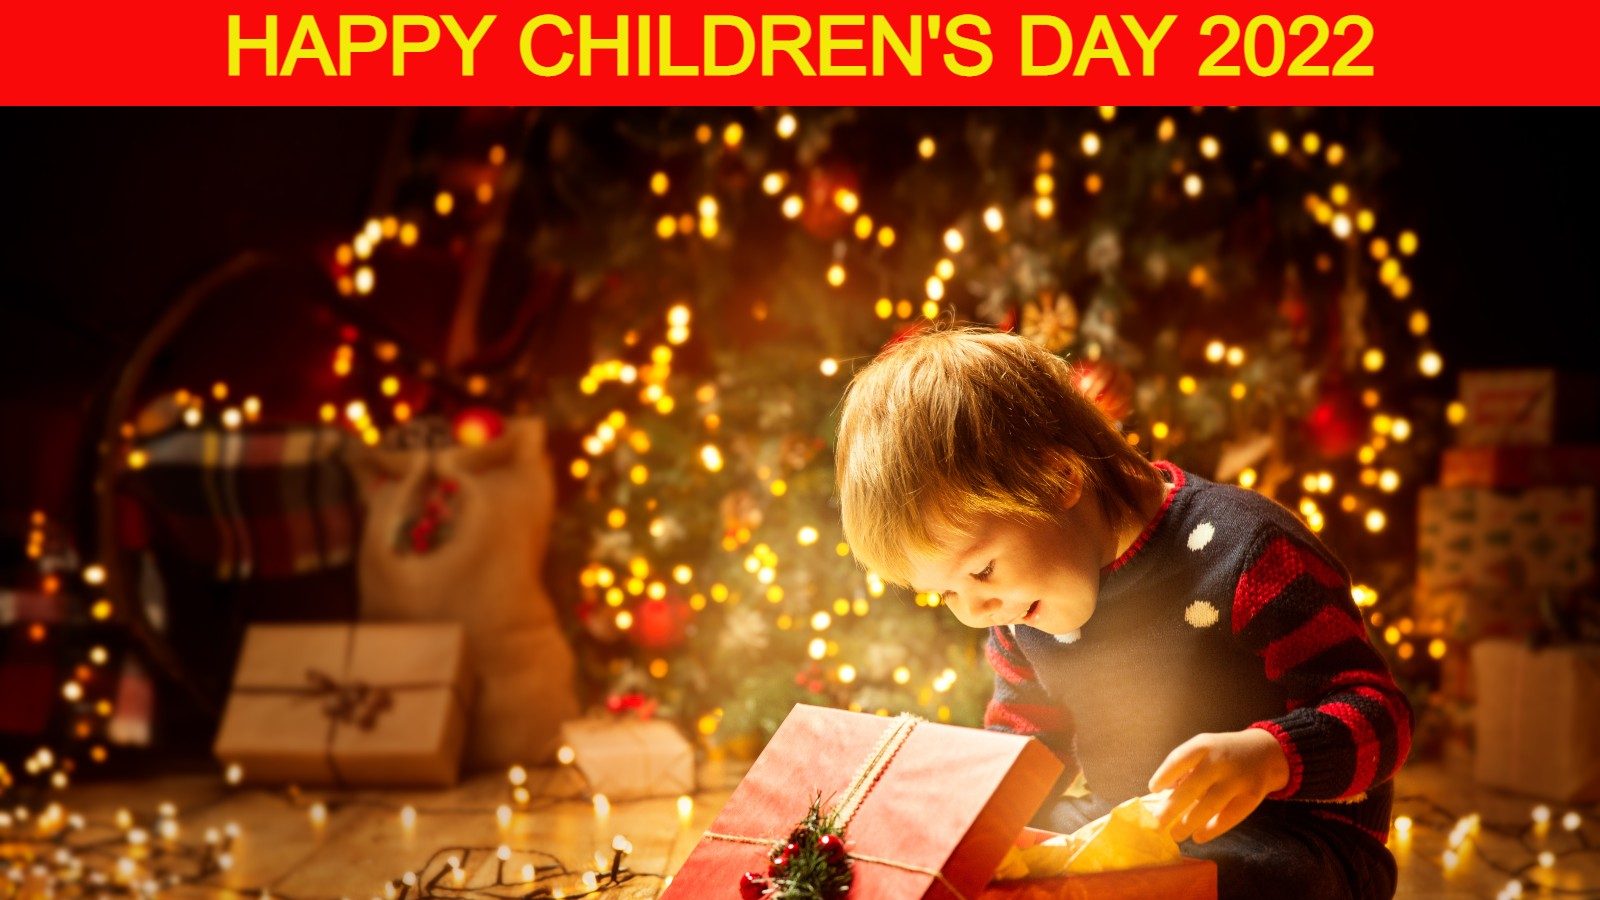 Children's Day 2022: 5 Interesting Gift Ideas for Your Little Ones